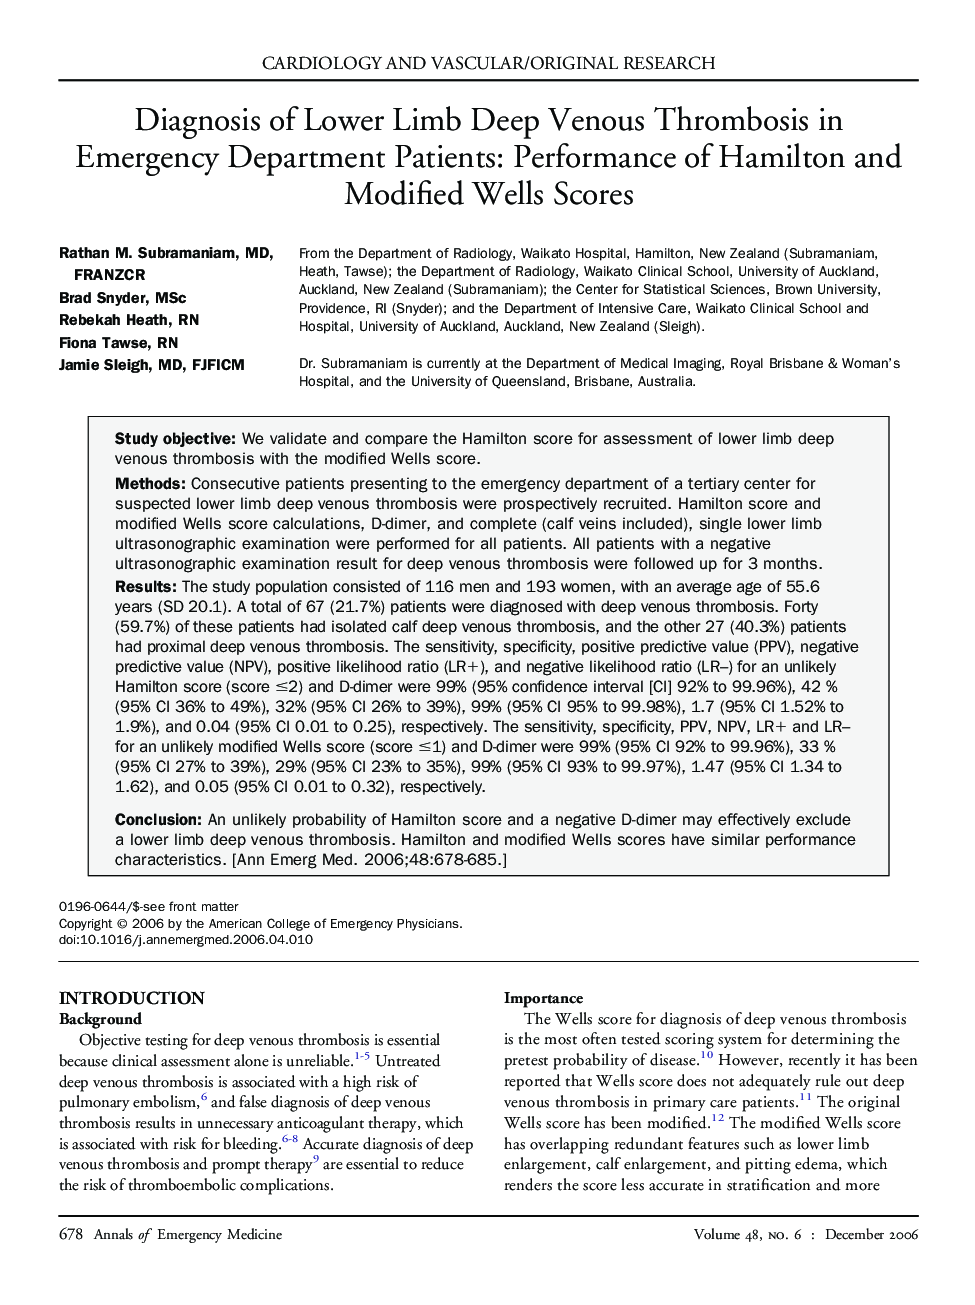 Diagnosis of Lower Limb Deep Venous Thrombosis in Emergency Department Patients: Performance of Hamilton and Modified Wells Scores 